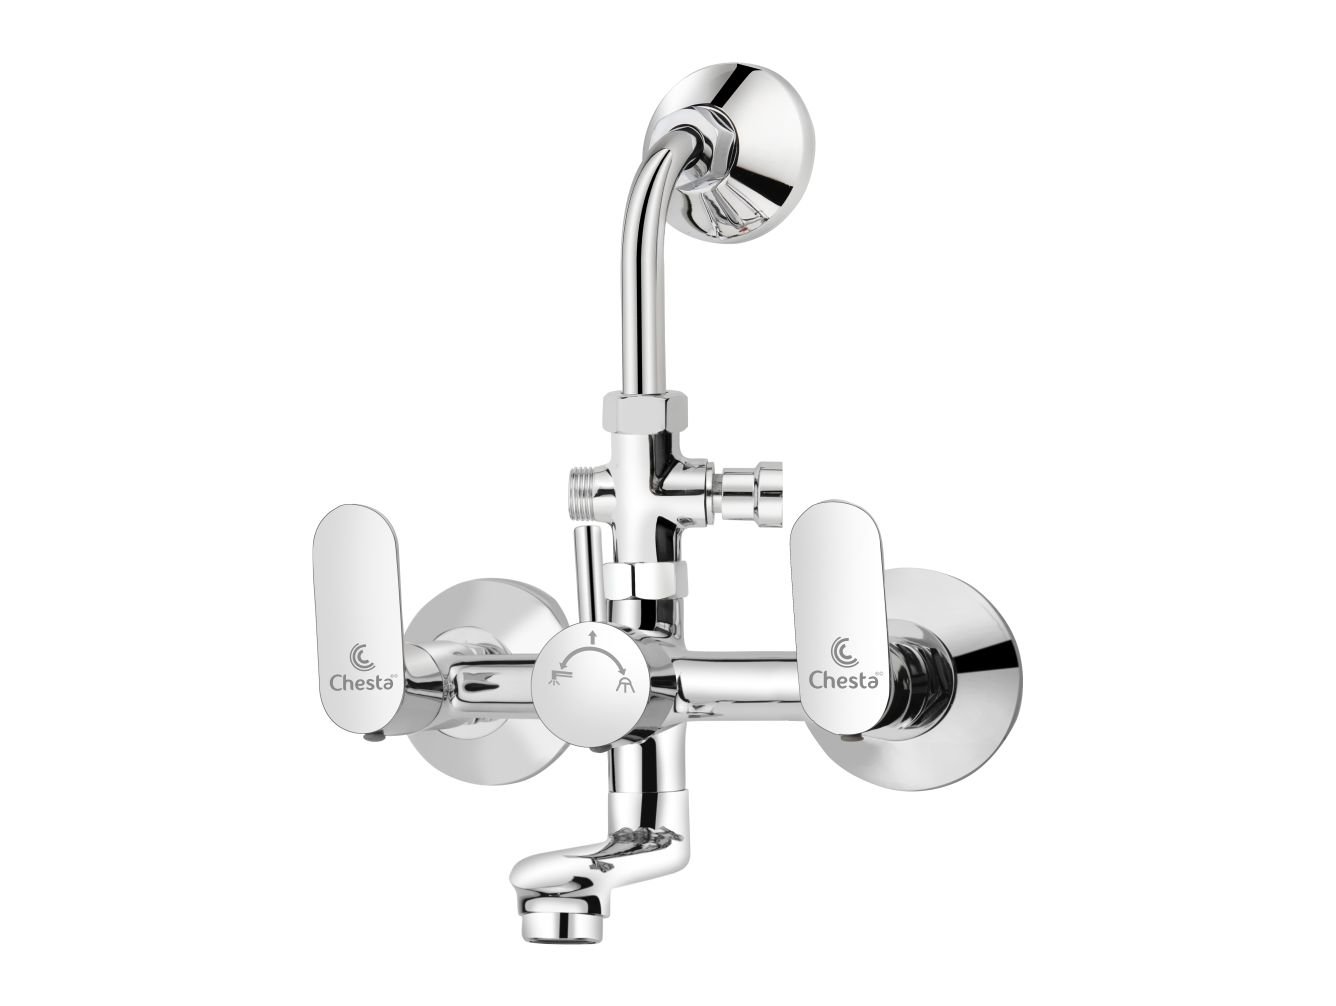 MO - 1023 - Wall Mixer 3 in 1 with L Bend by Chesta Bath Fittings